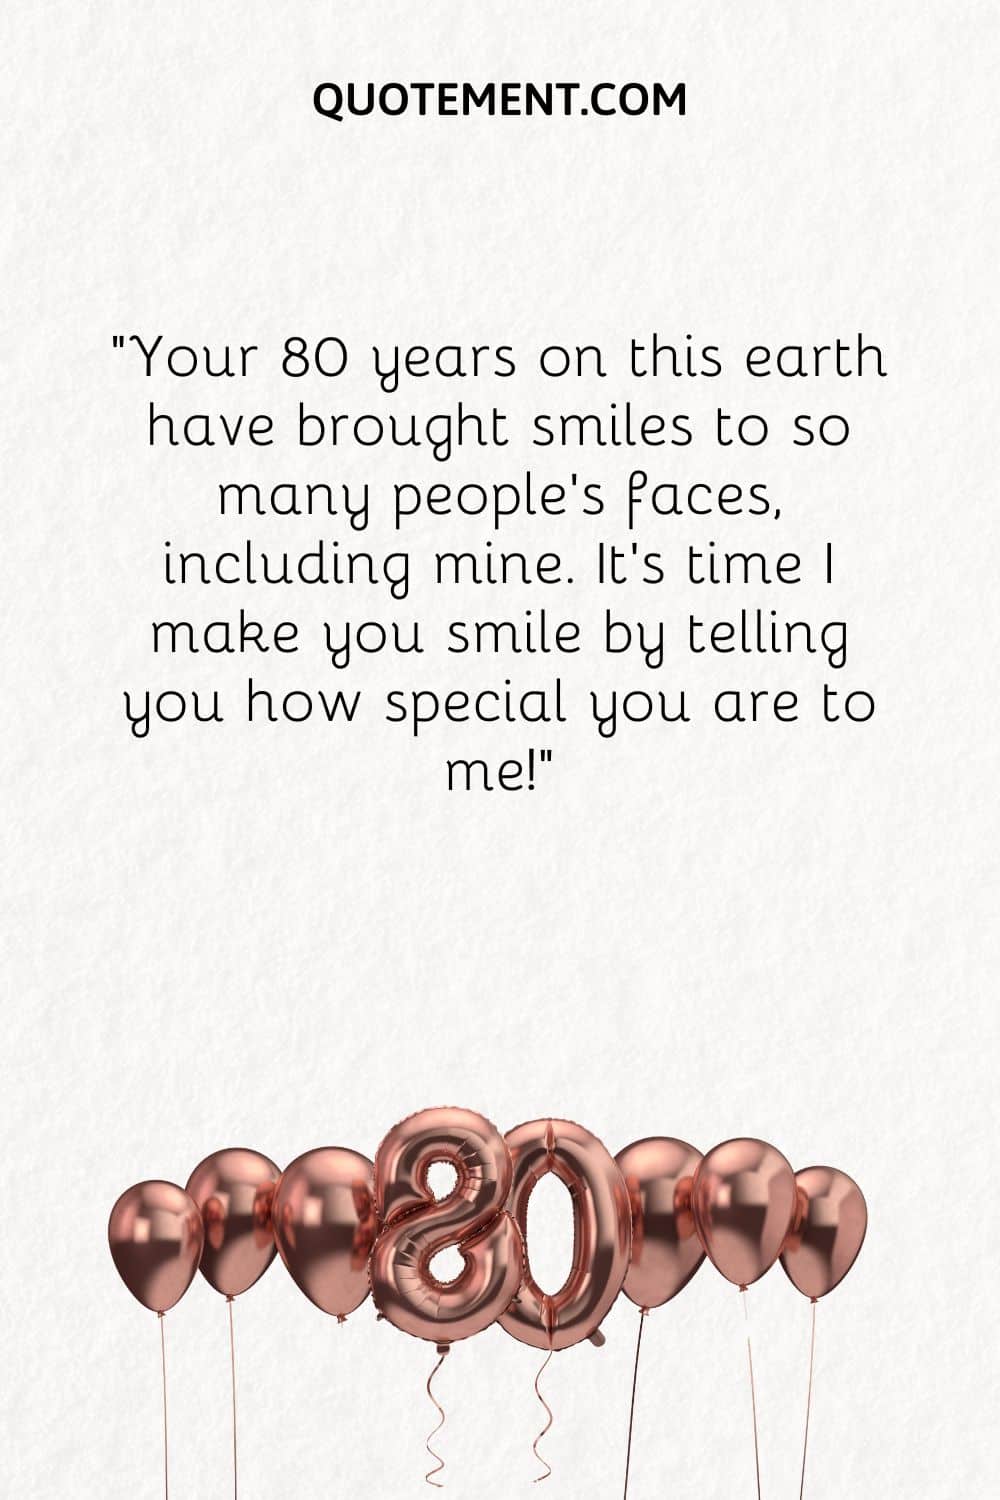 Your 80 years on this earth have brought smiles to so many people's faces, including mine